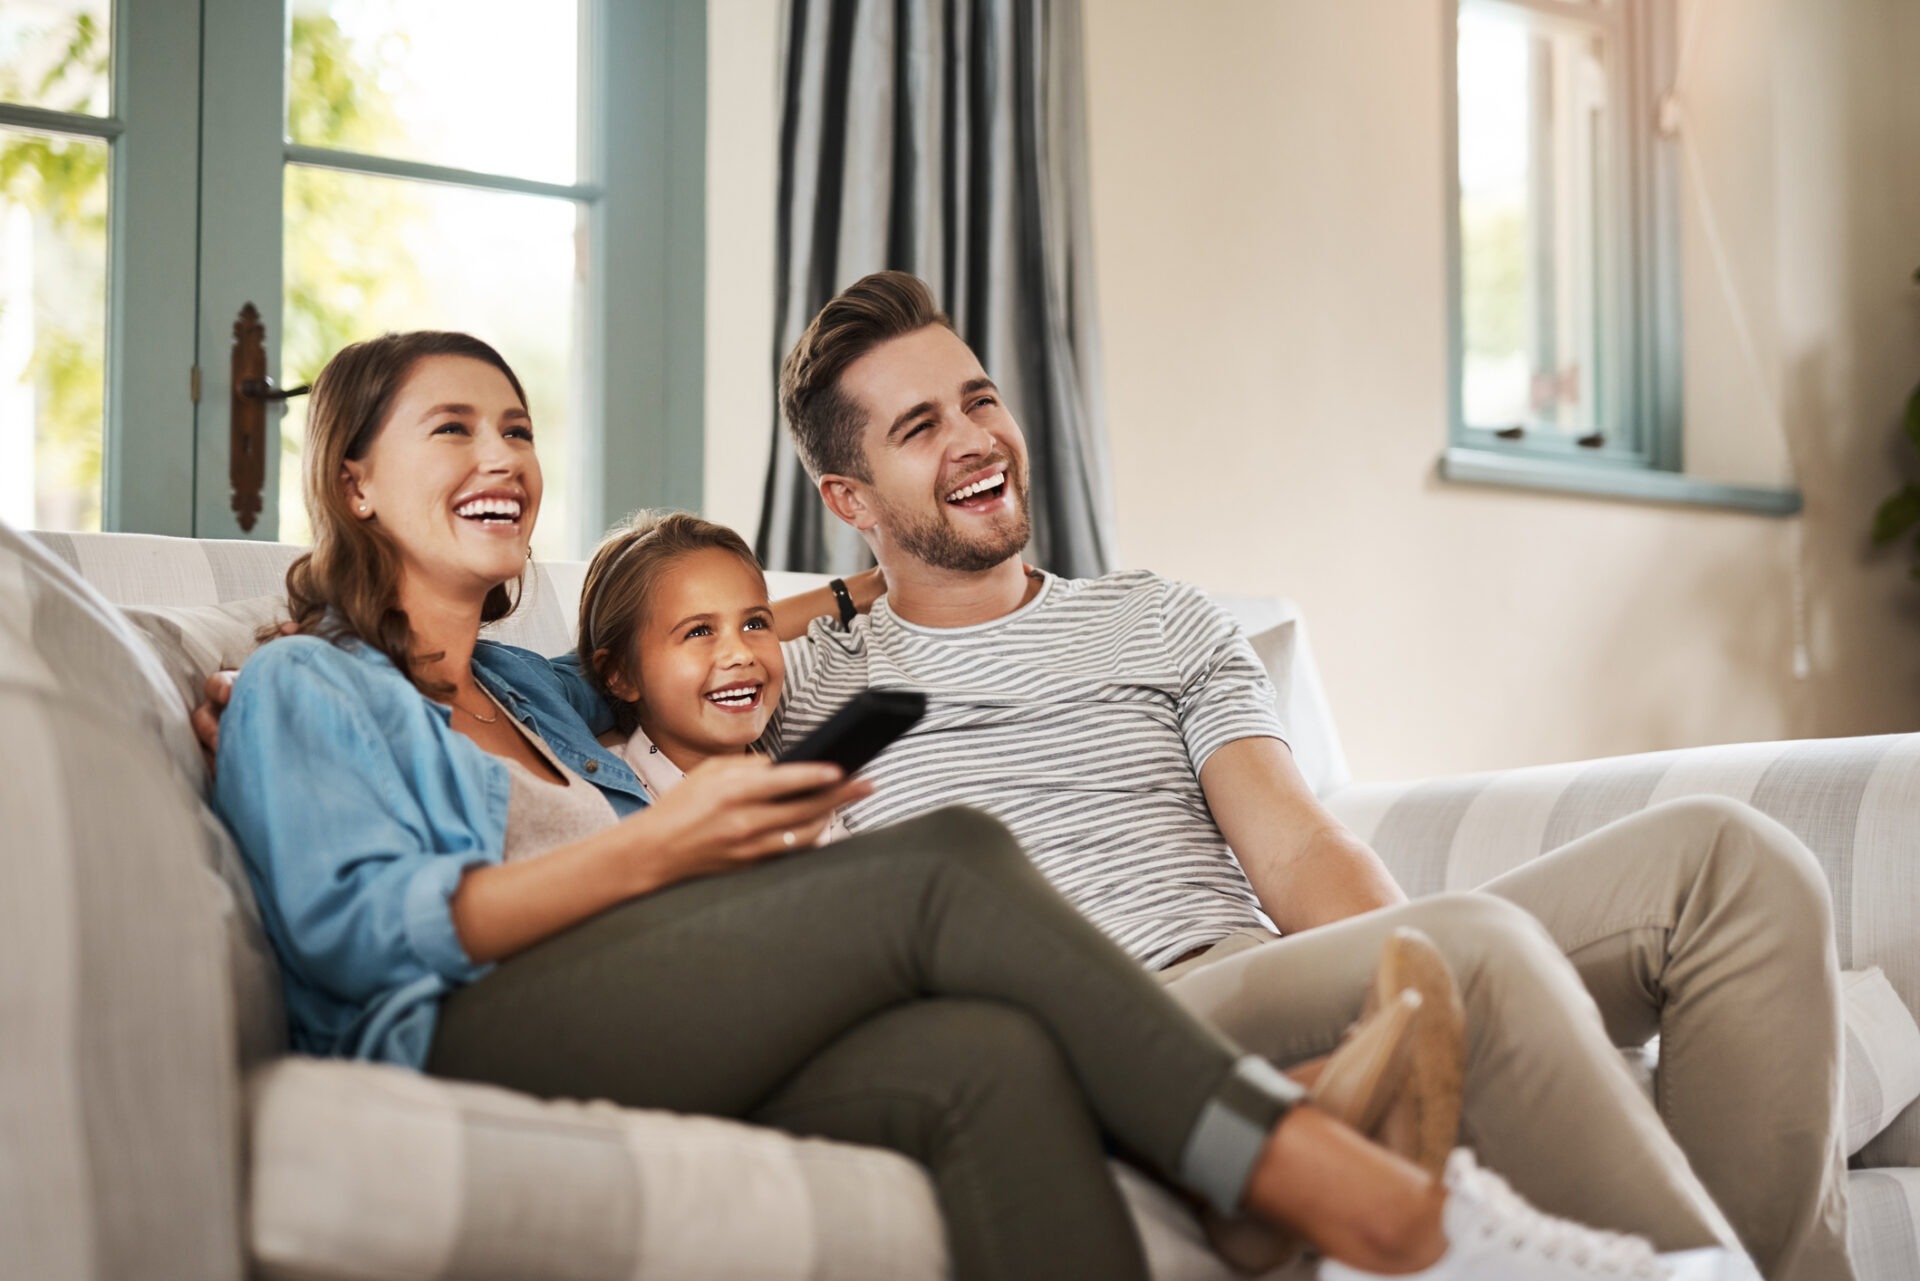 Two adults and a child are sitting on a couch, smiling and looking to the side, while one person holds a remote control. They appear happy.